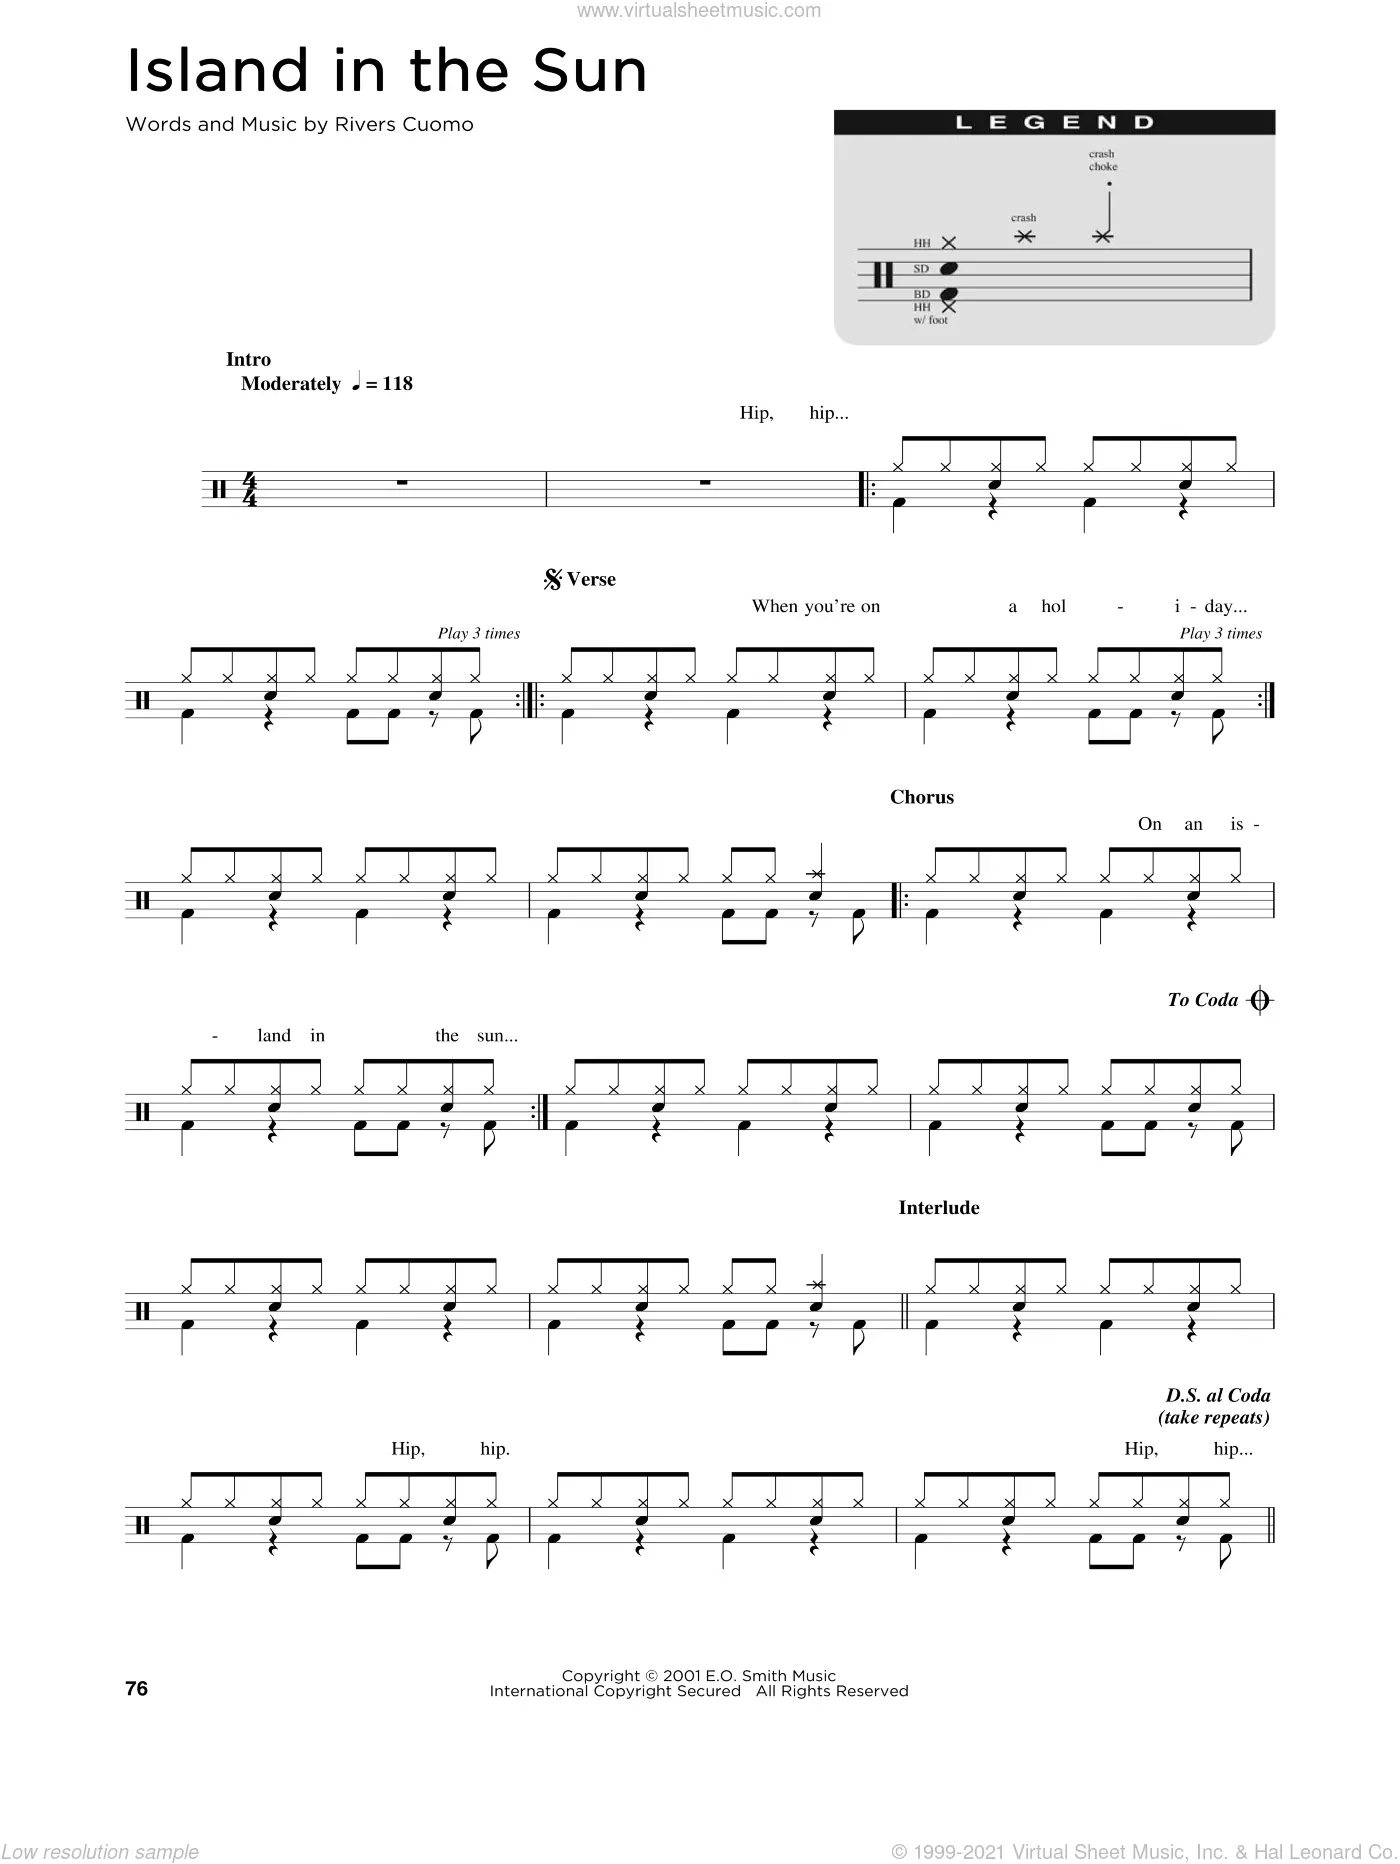 Weezer Sheet Music to download and print